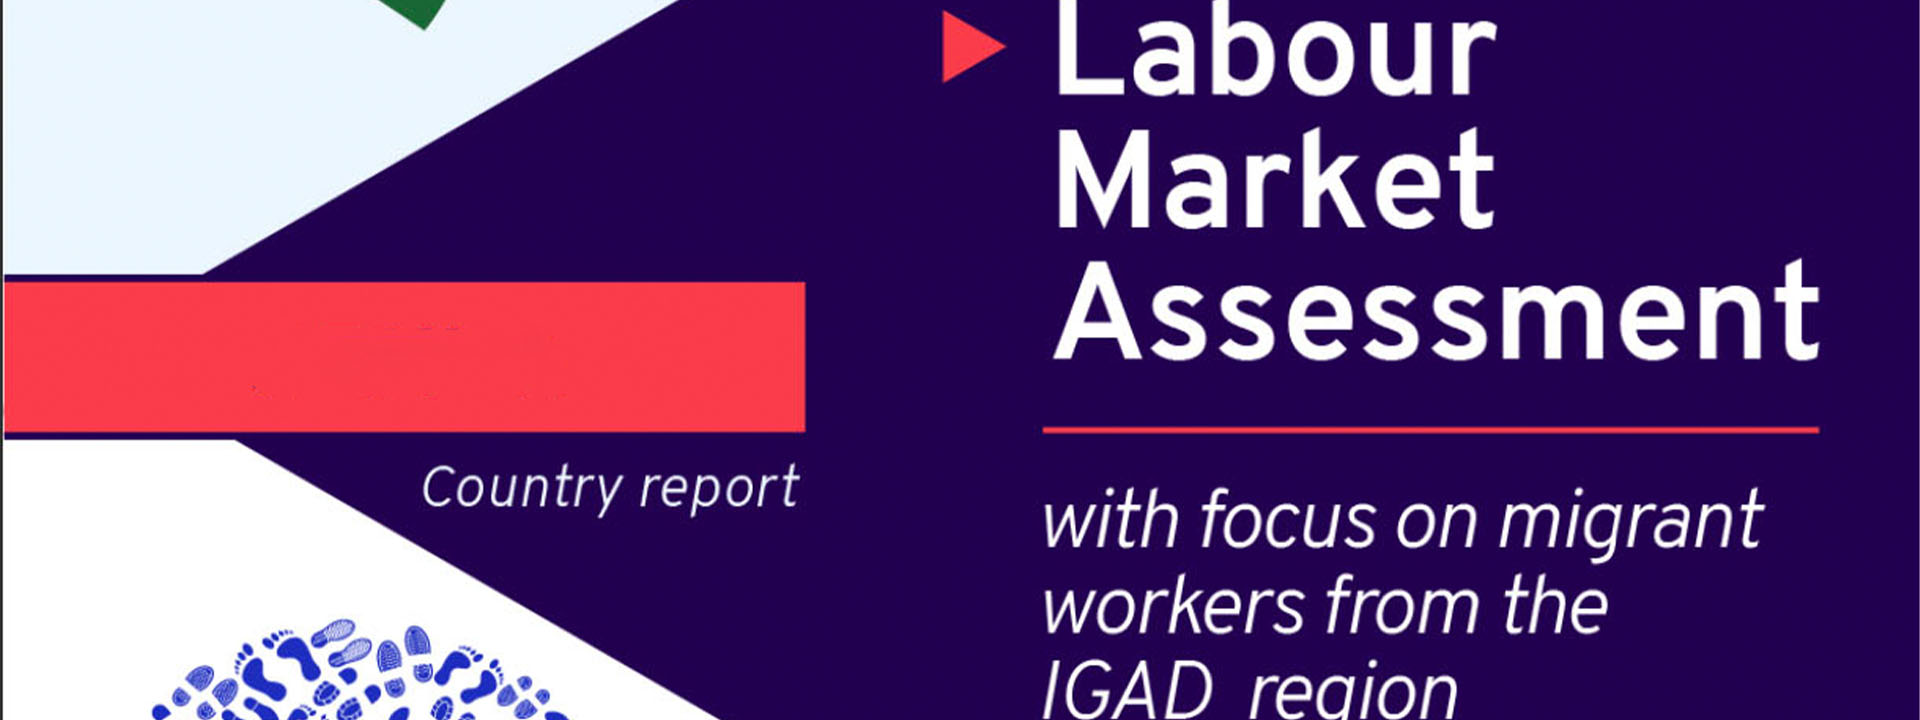 Labour Market Assessment with a Focus on Migrant Workers from the IGAD Region